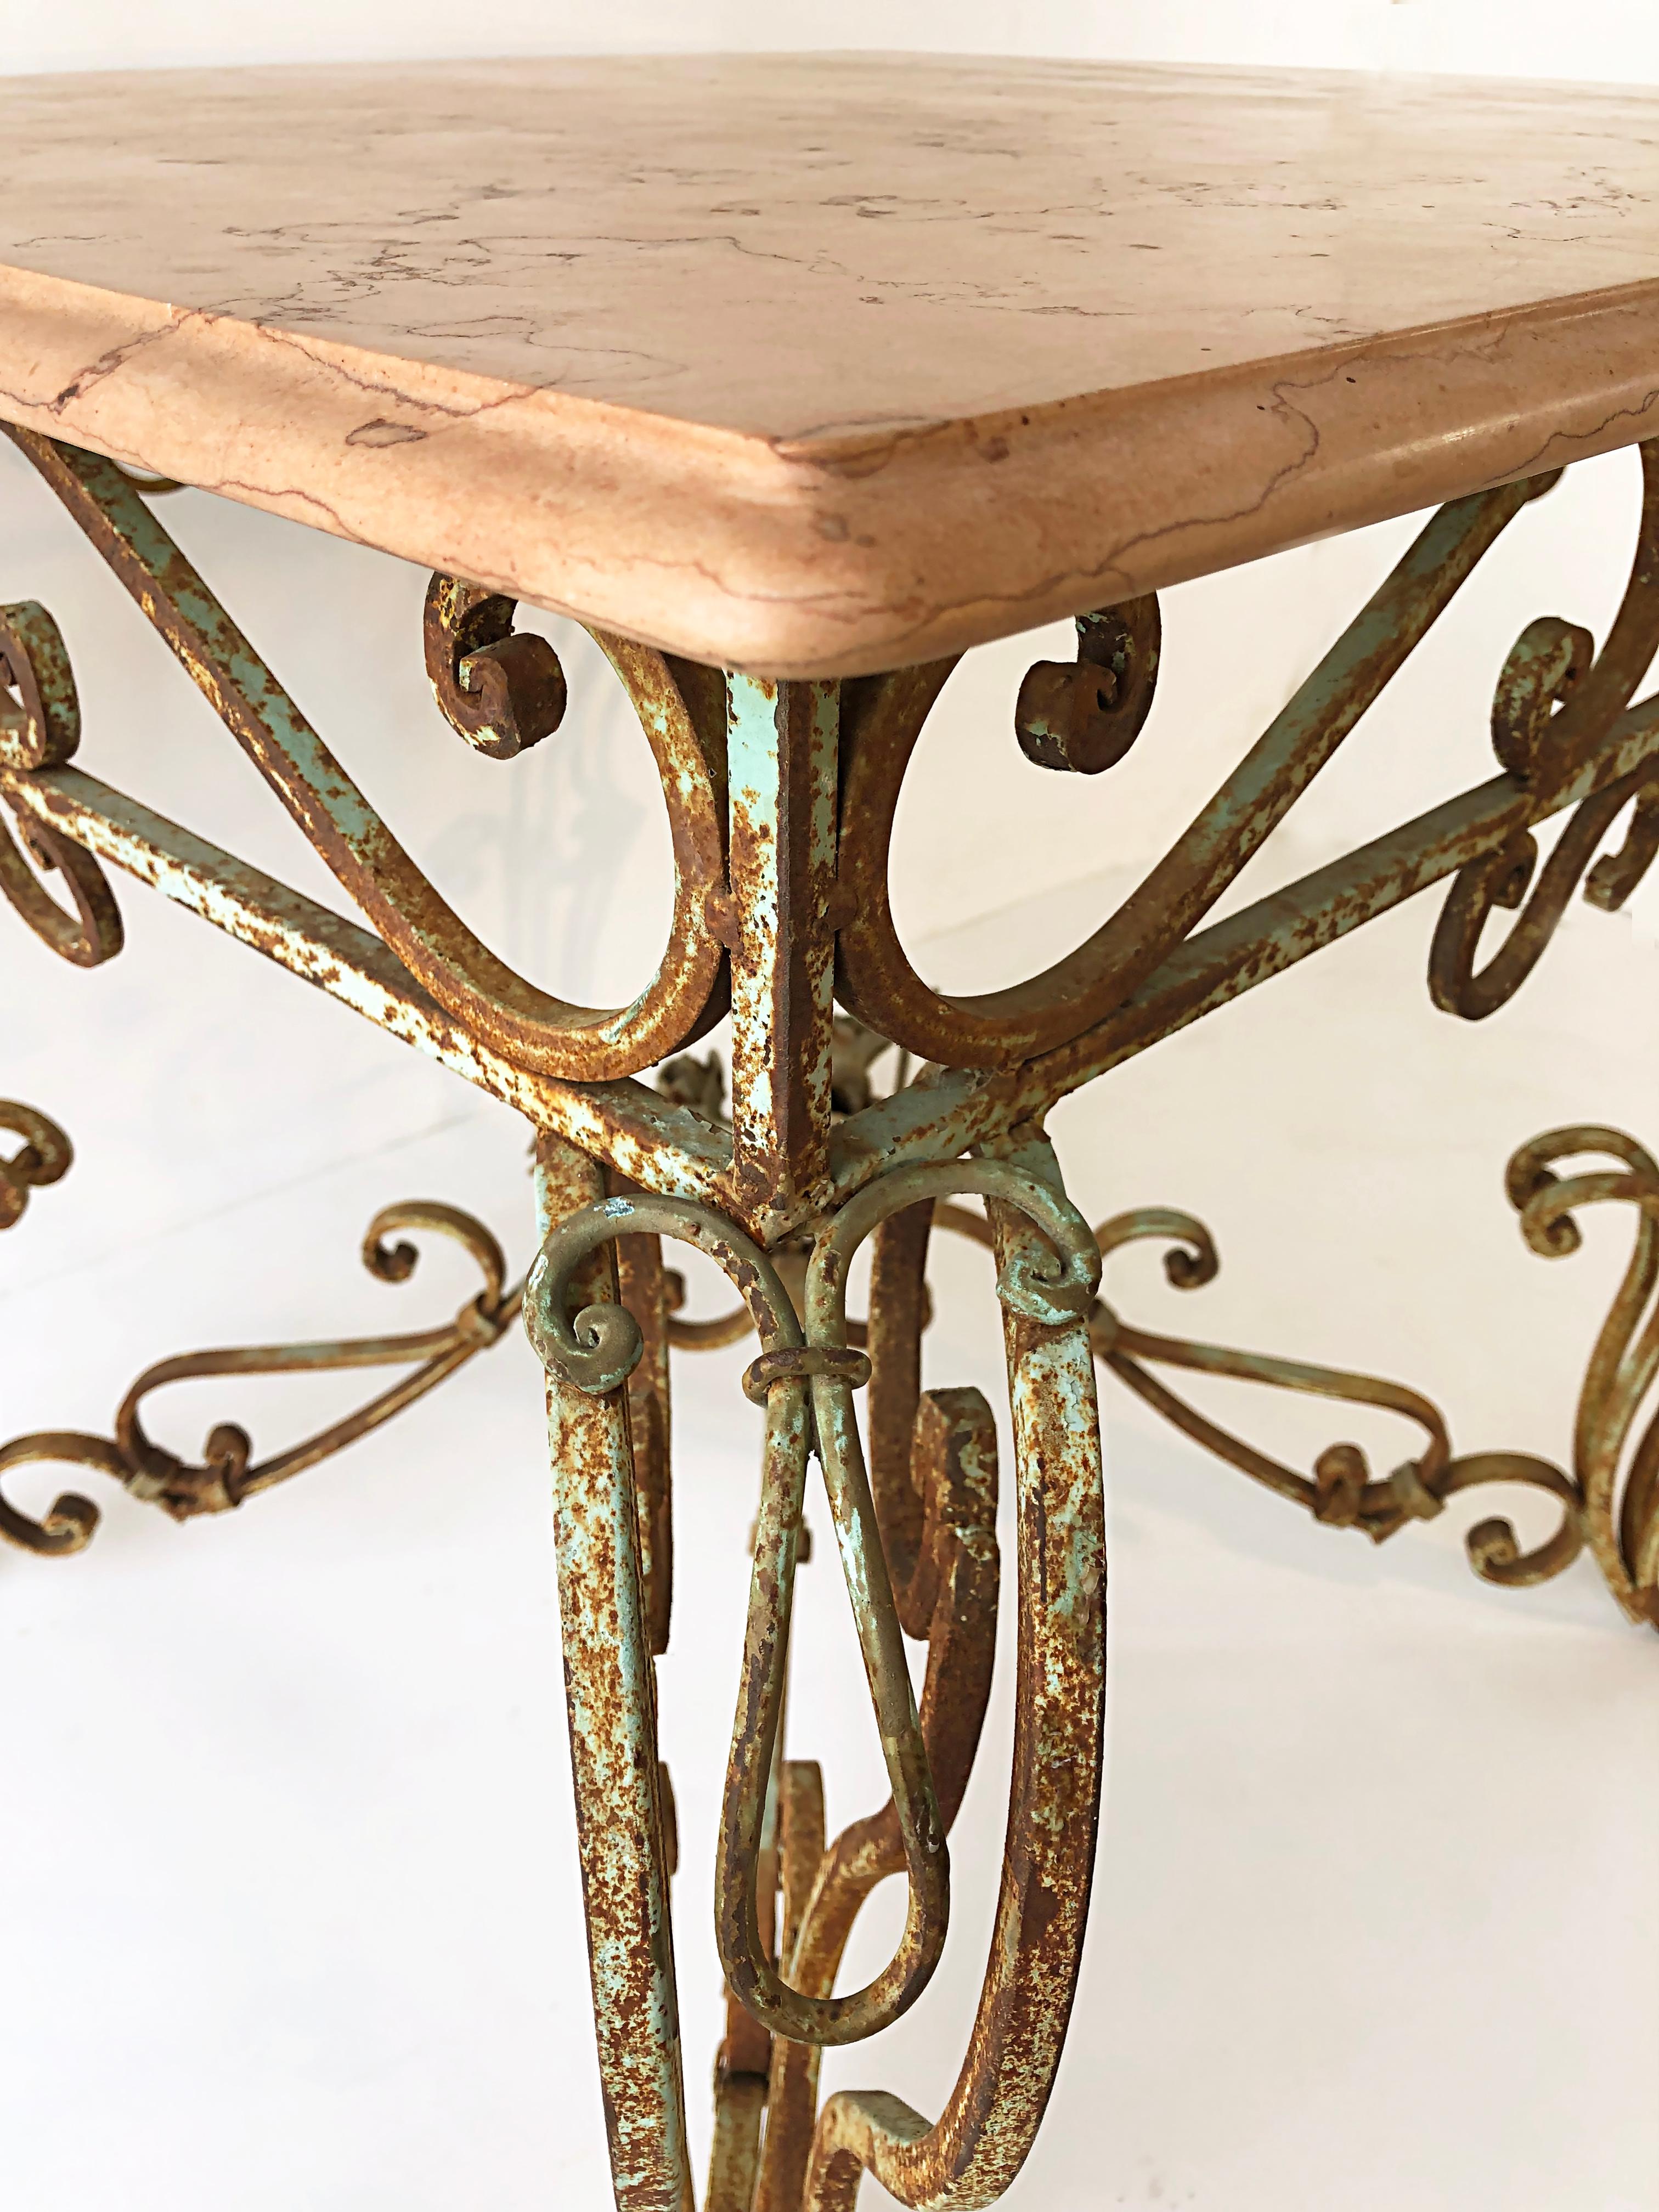 Vintage Wrought Iron Marble Top Garden Table with Scrollwork and Flowers For Sale 2